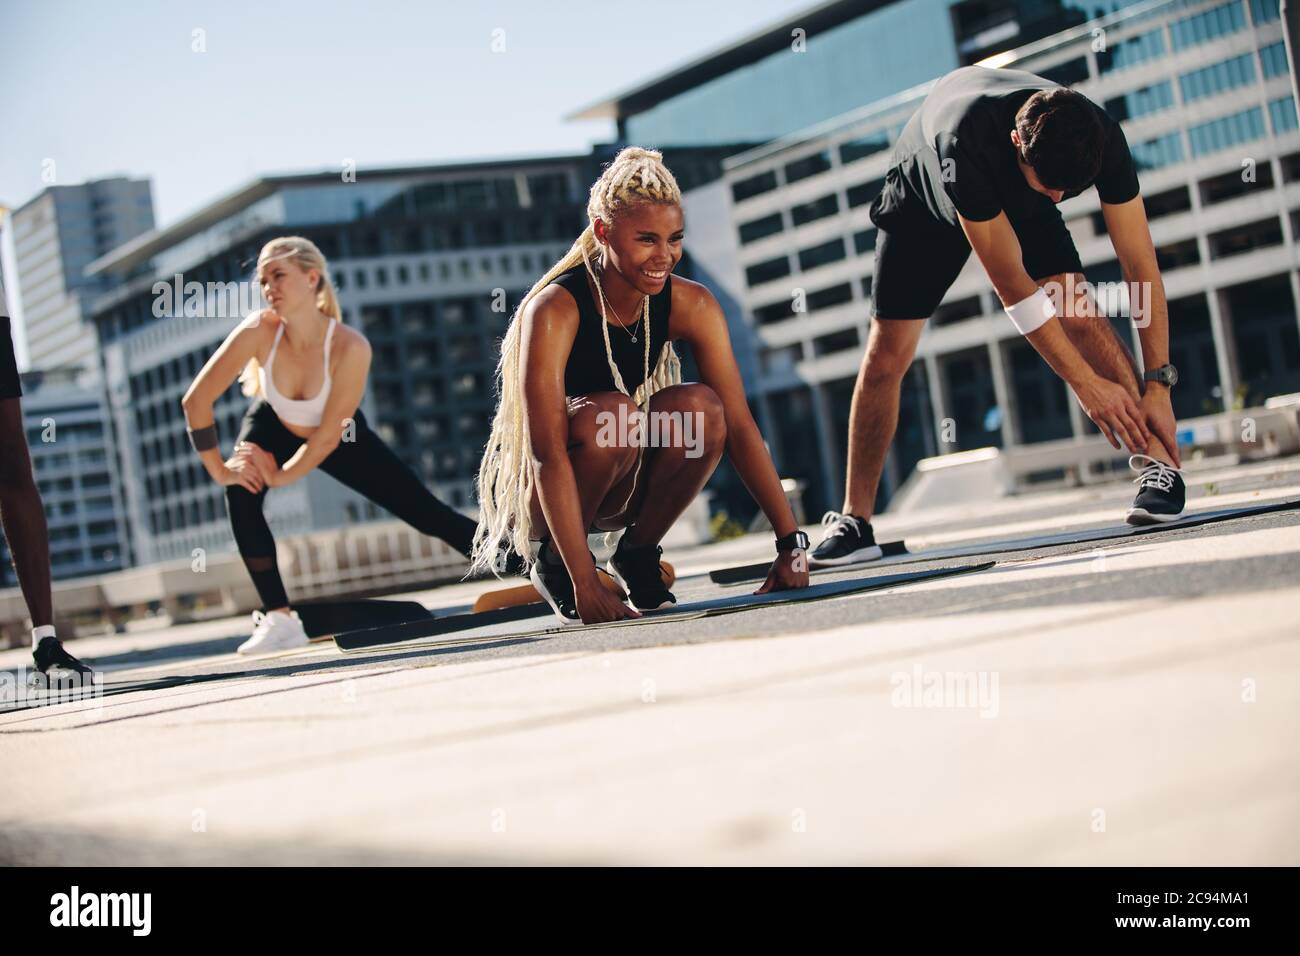 Group of people during workout session outdoors. Friends stretching on exercise mat outdoors in the city. Stock Photo